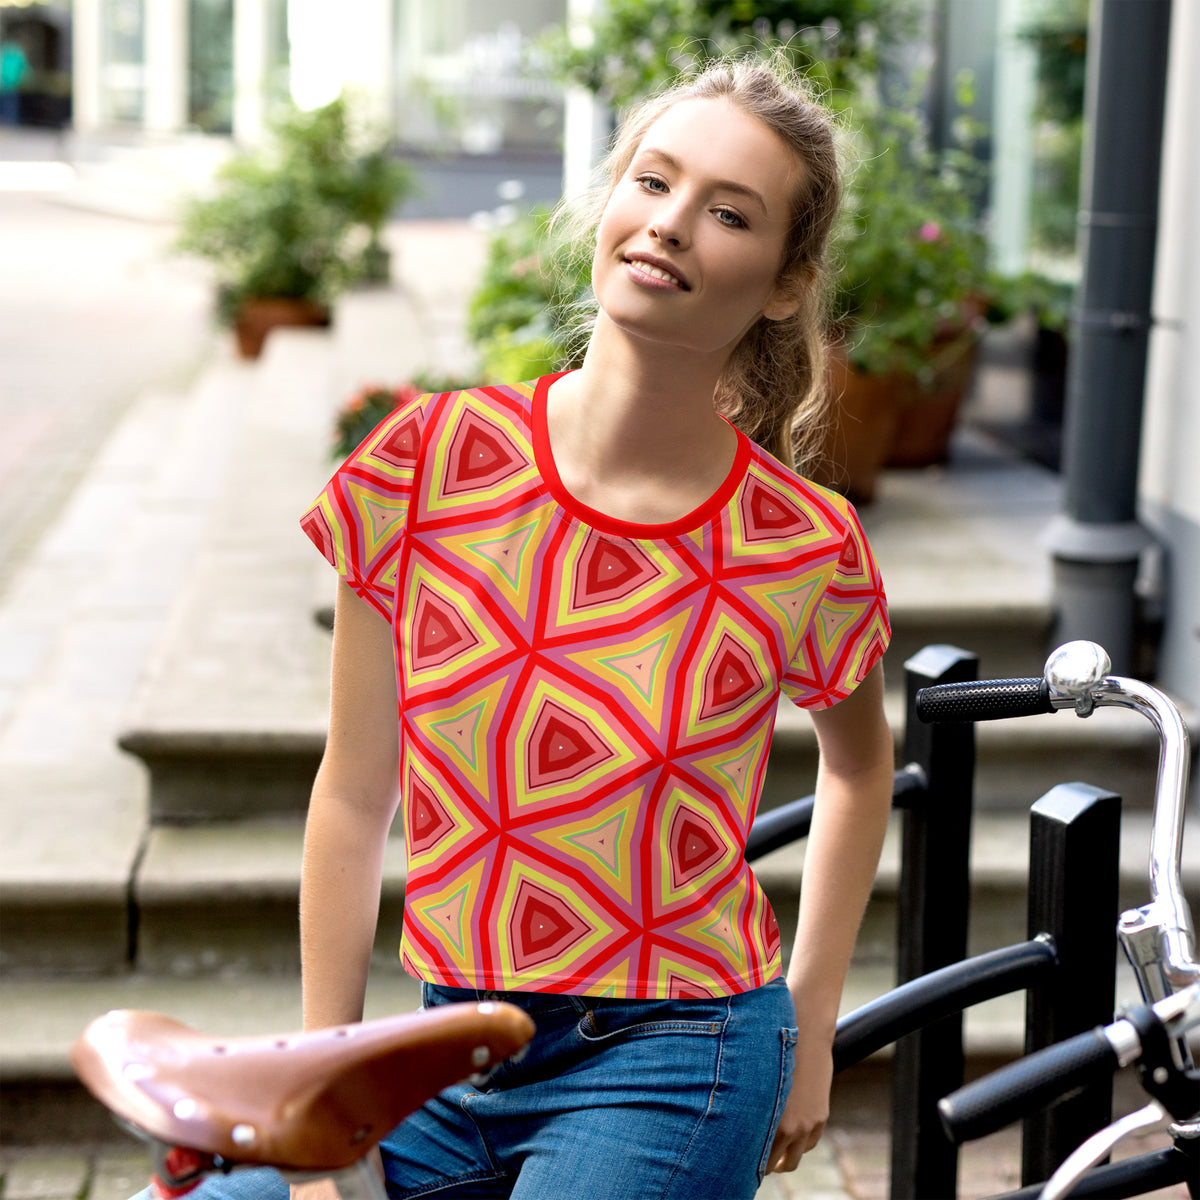 Boho Chic Crop Tee with vibrant bohemian patterns on a model